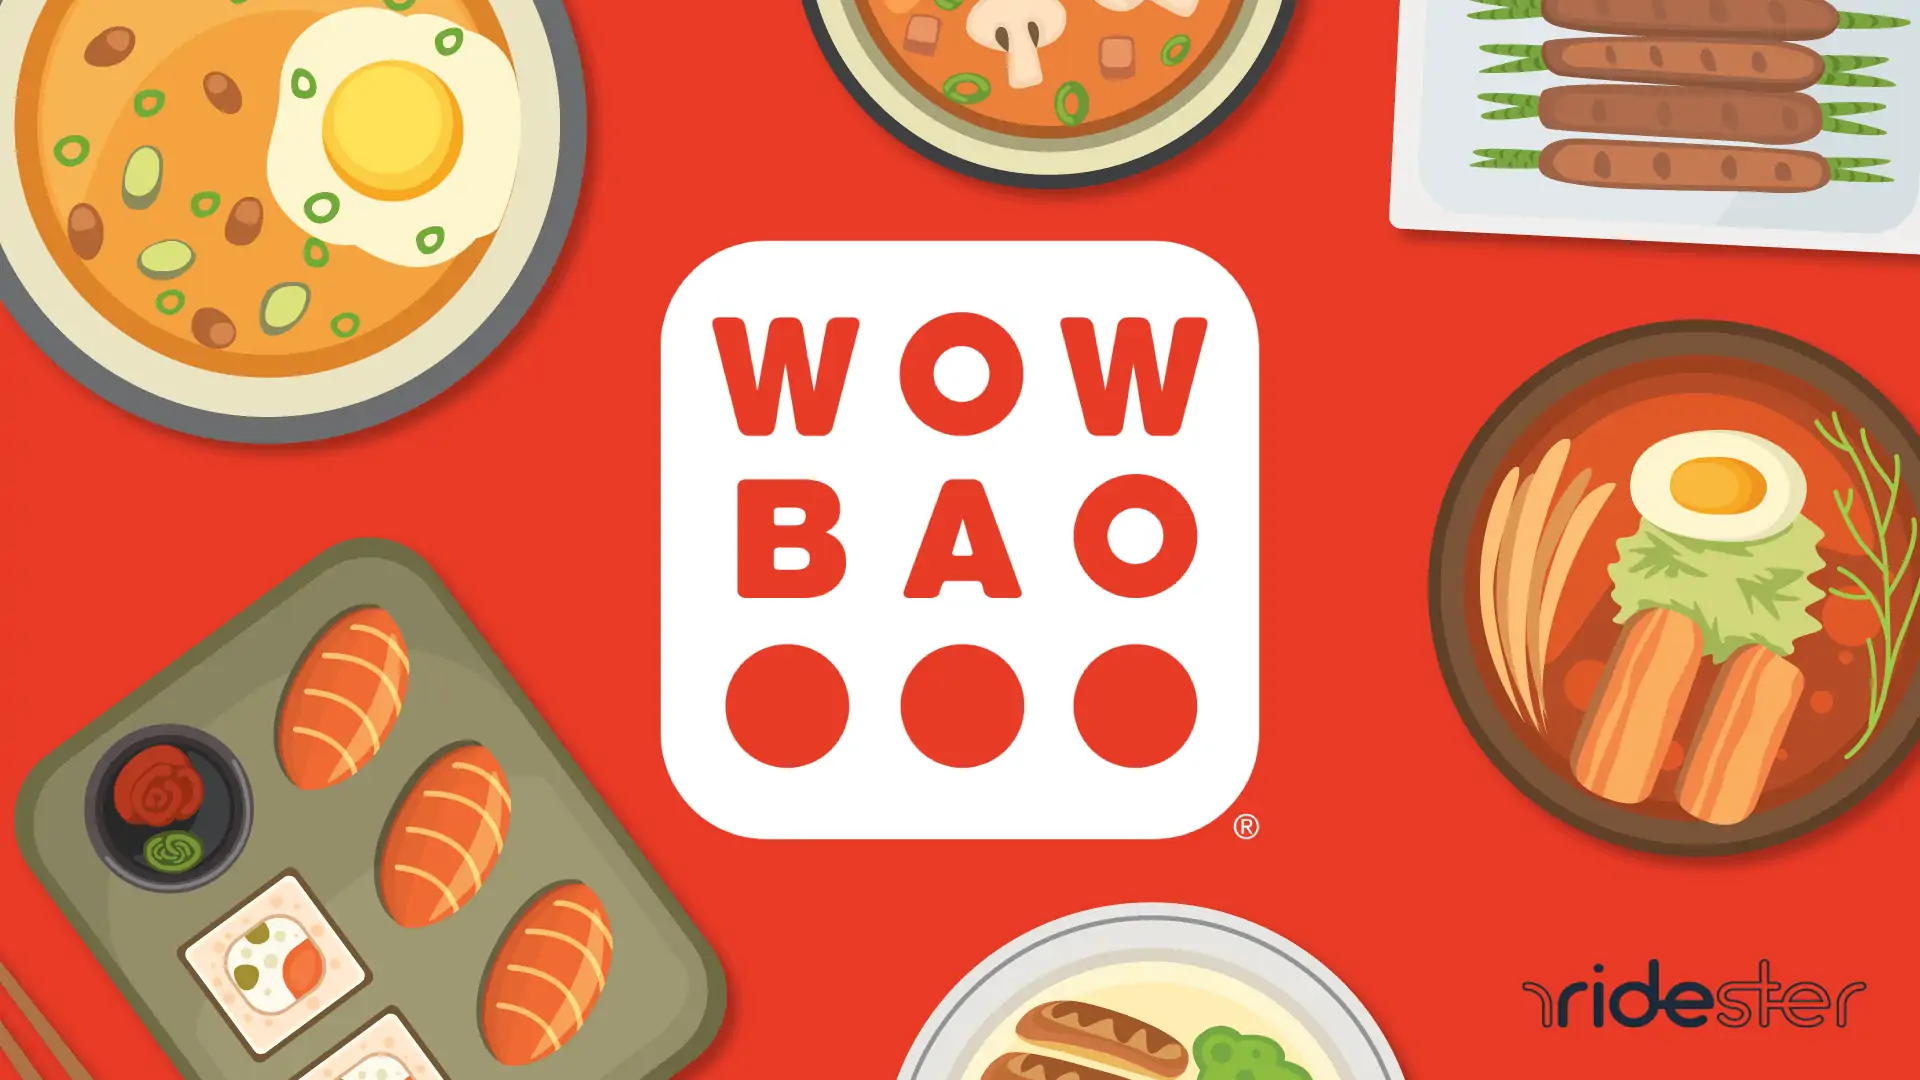 vector illustration of wow bao logo surrounded by food items